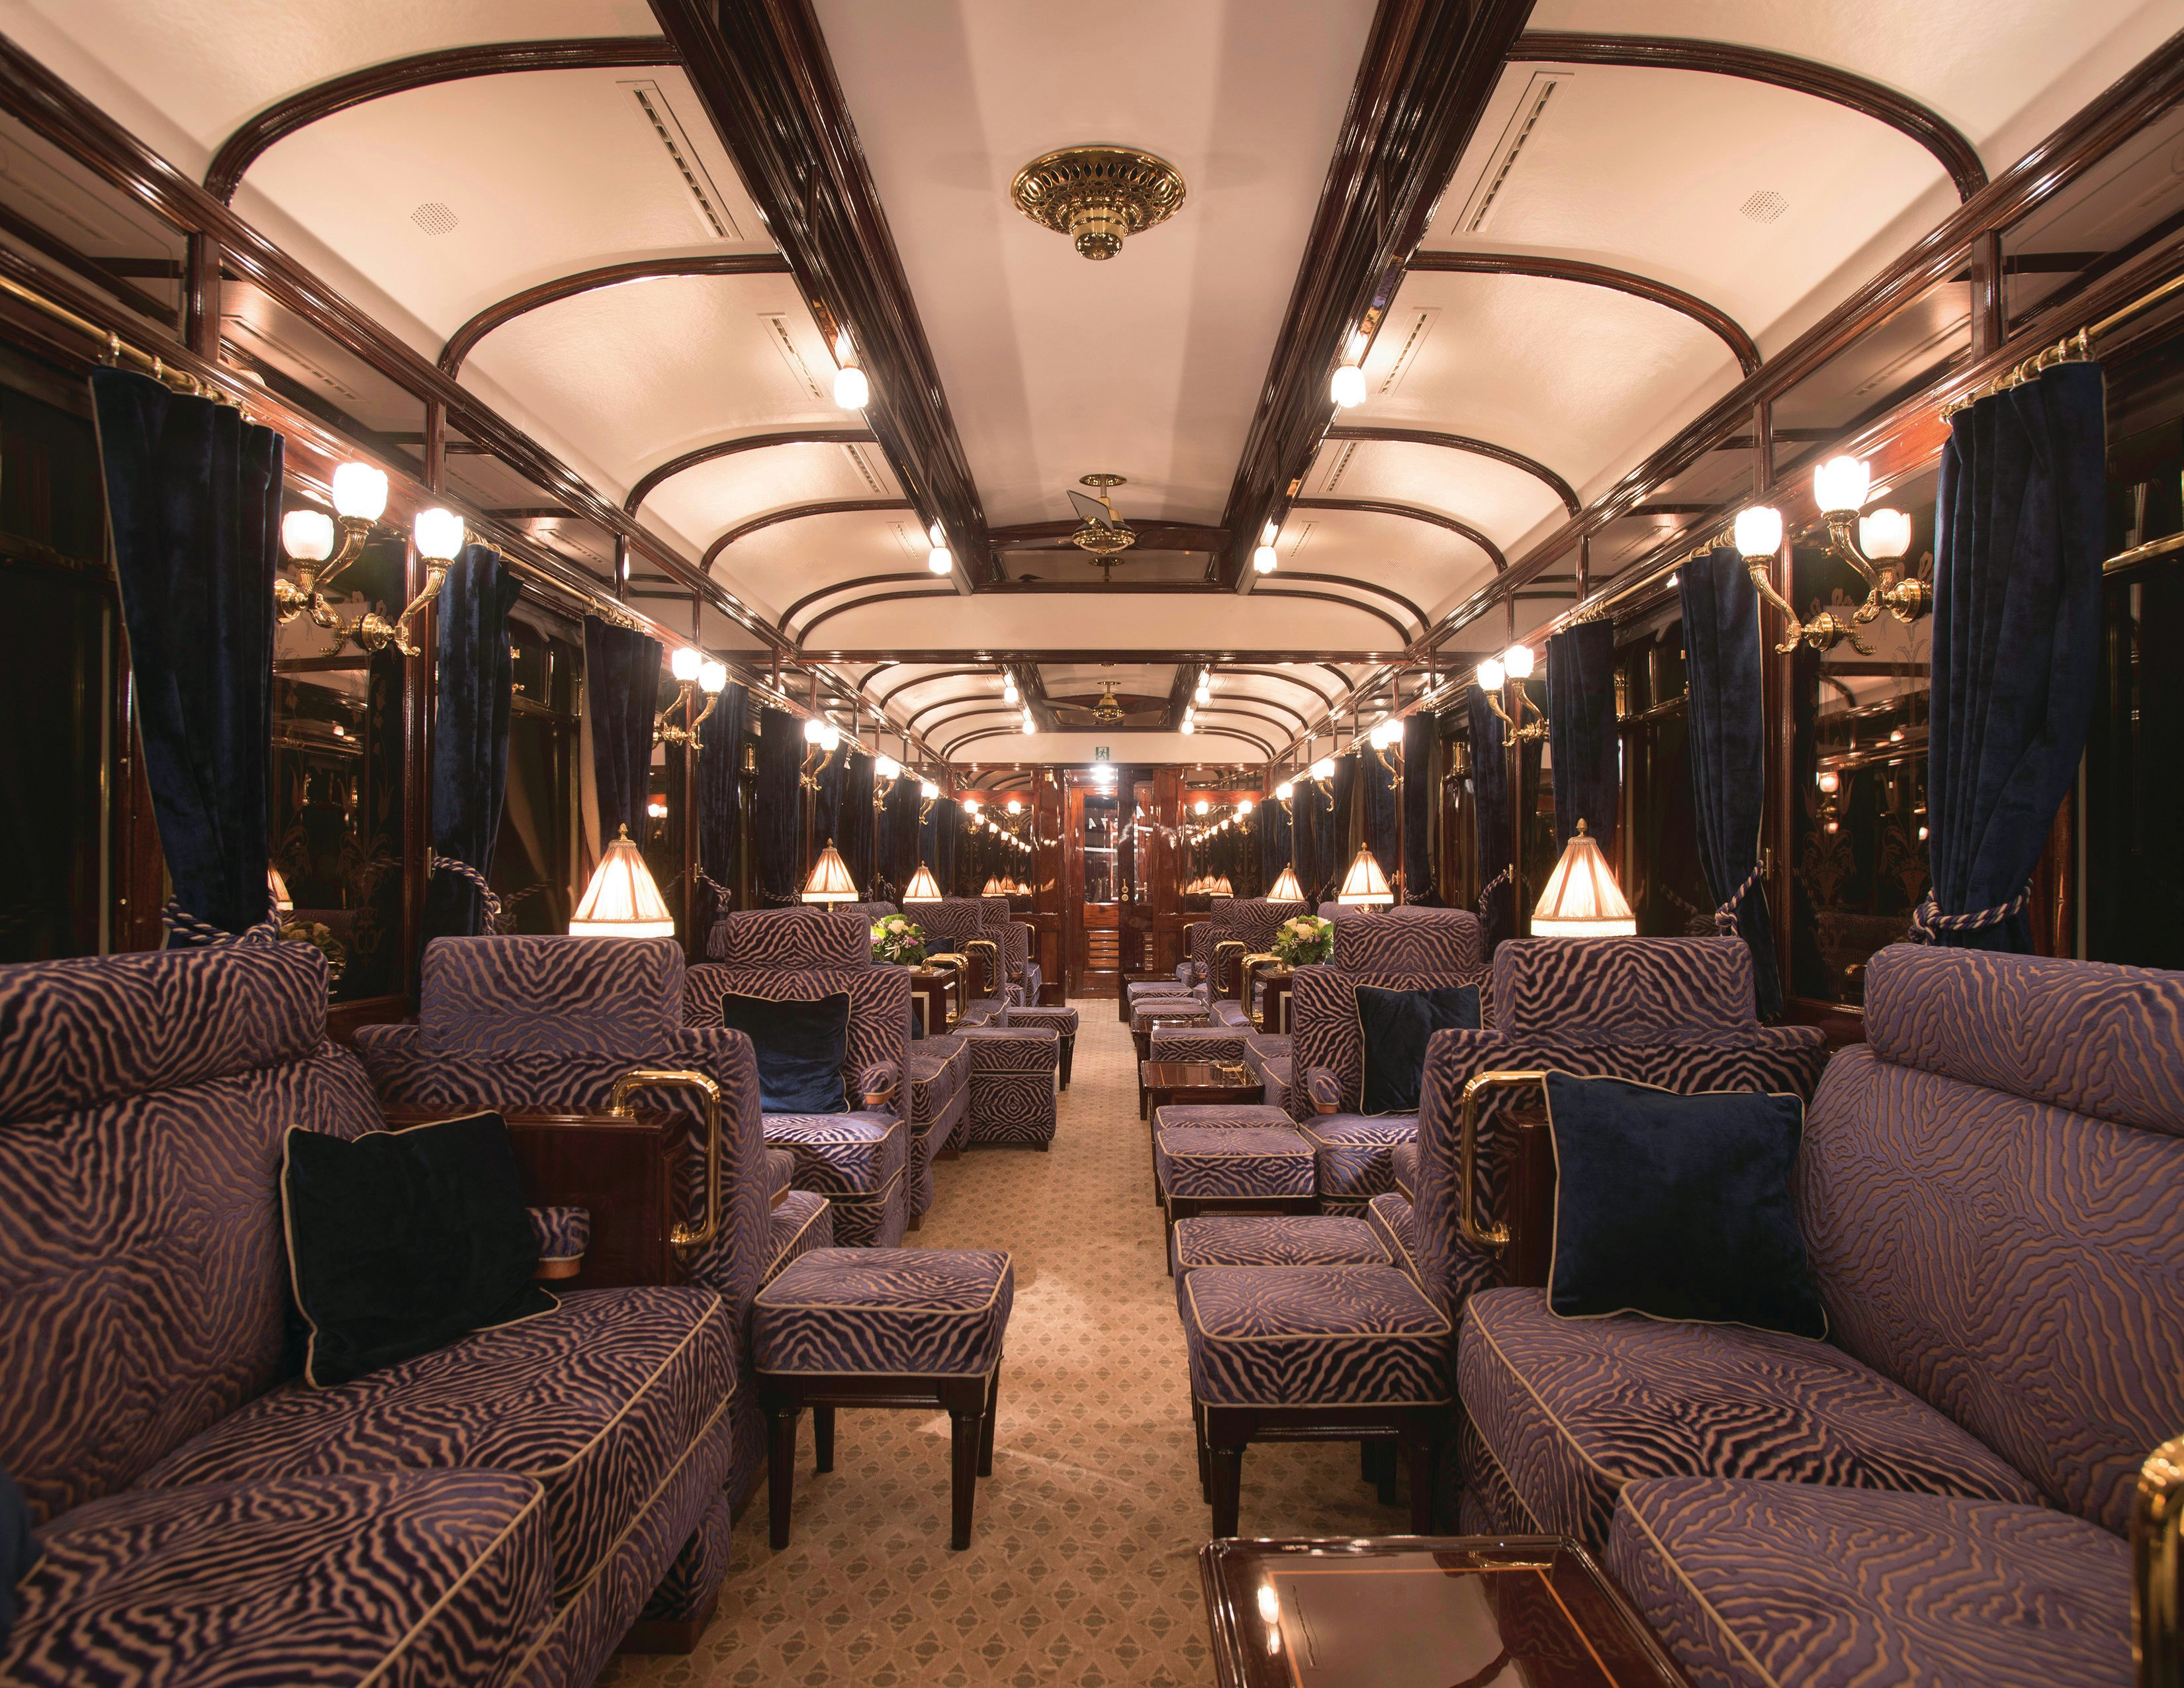 The interior carriage of the Venice Simplon Orient Express is stylish and chic